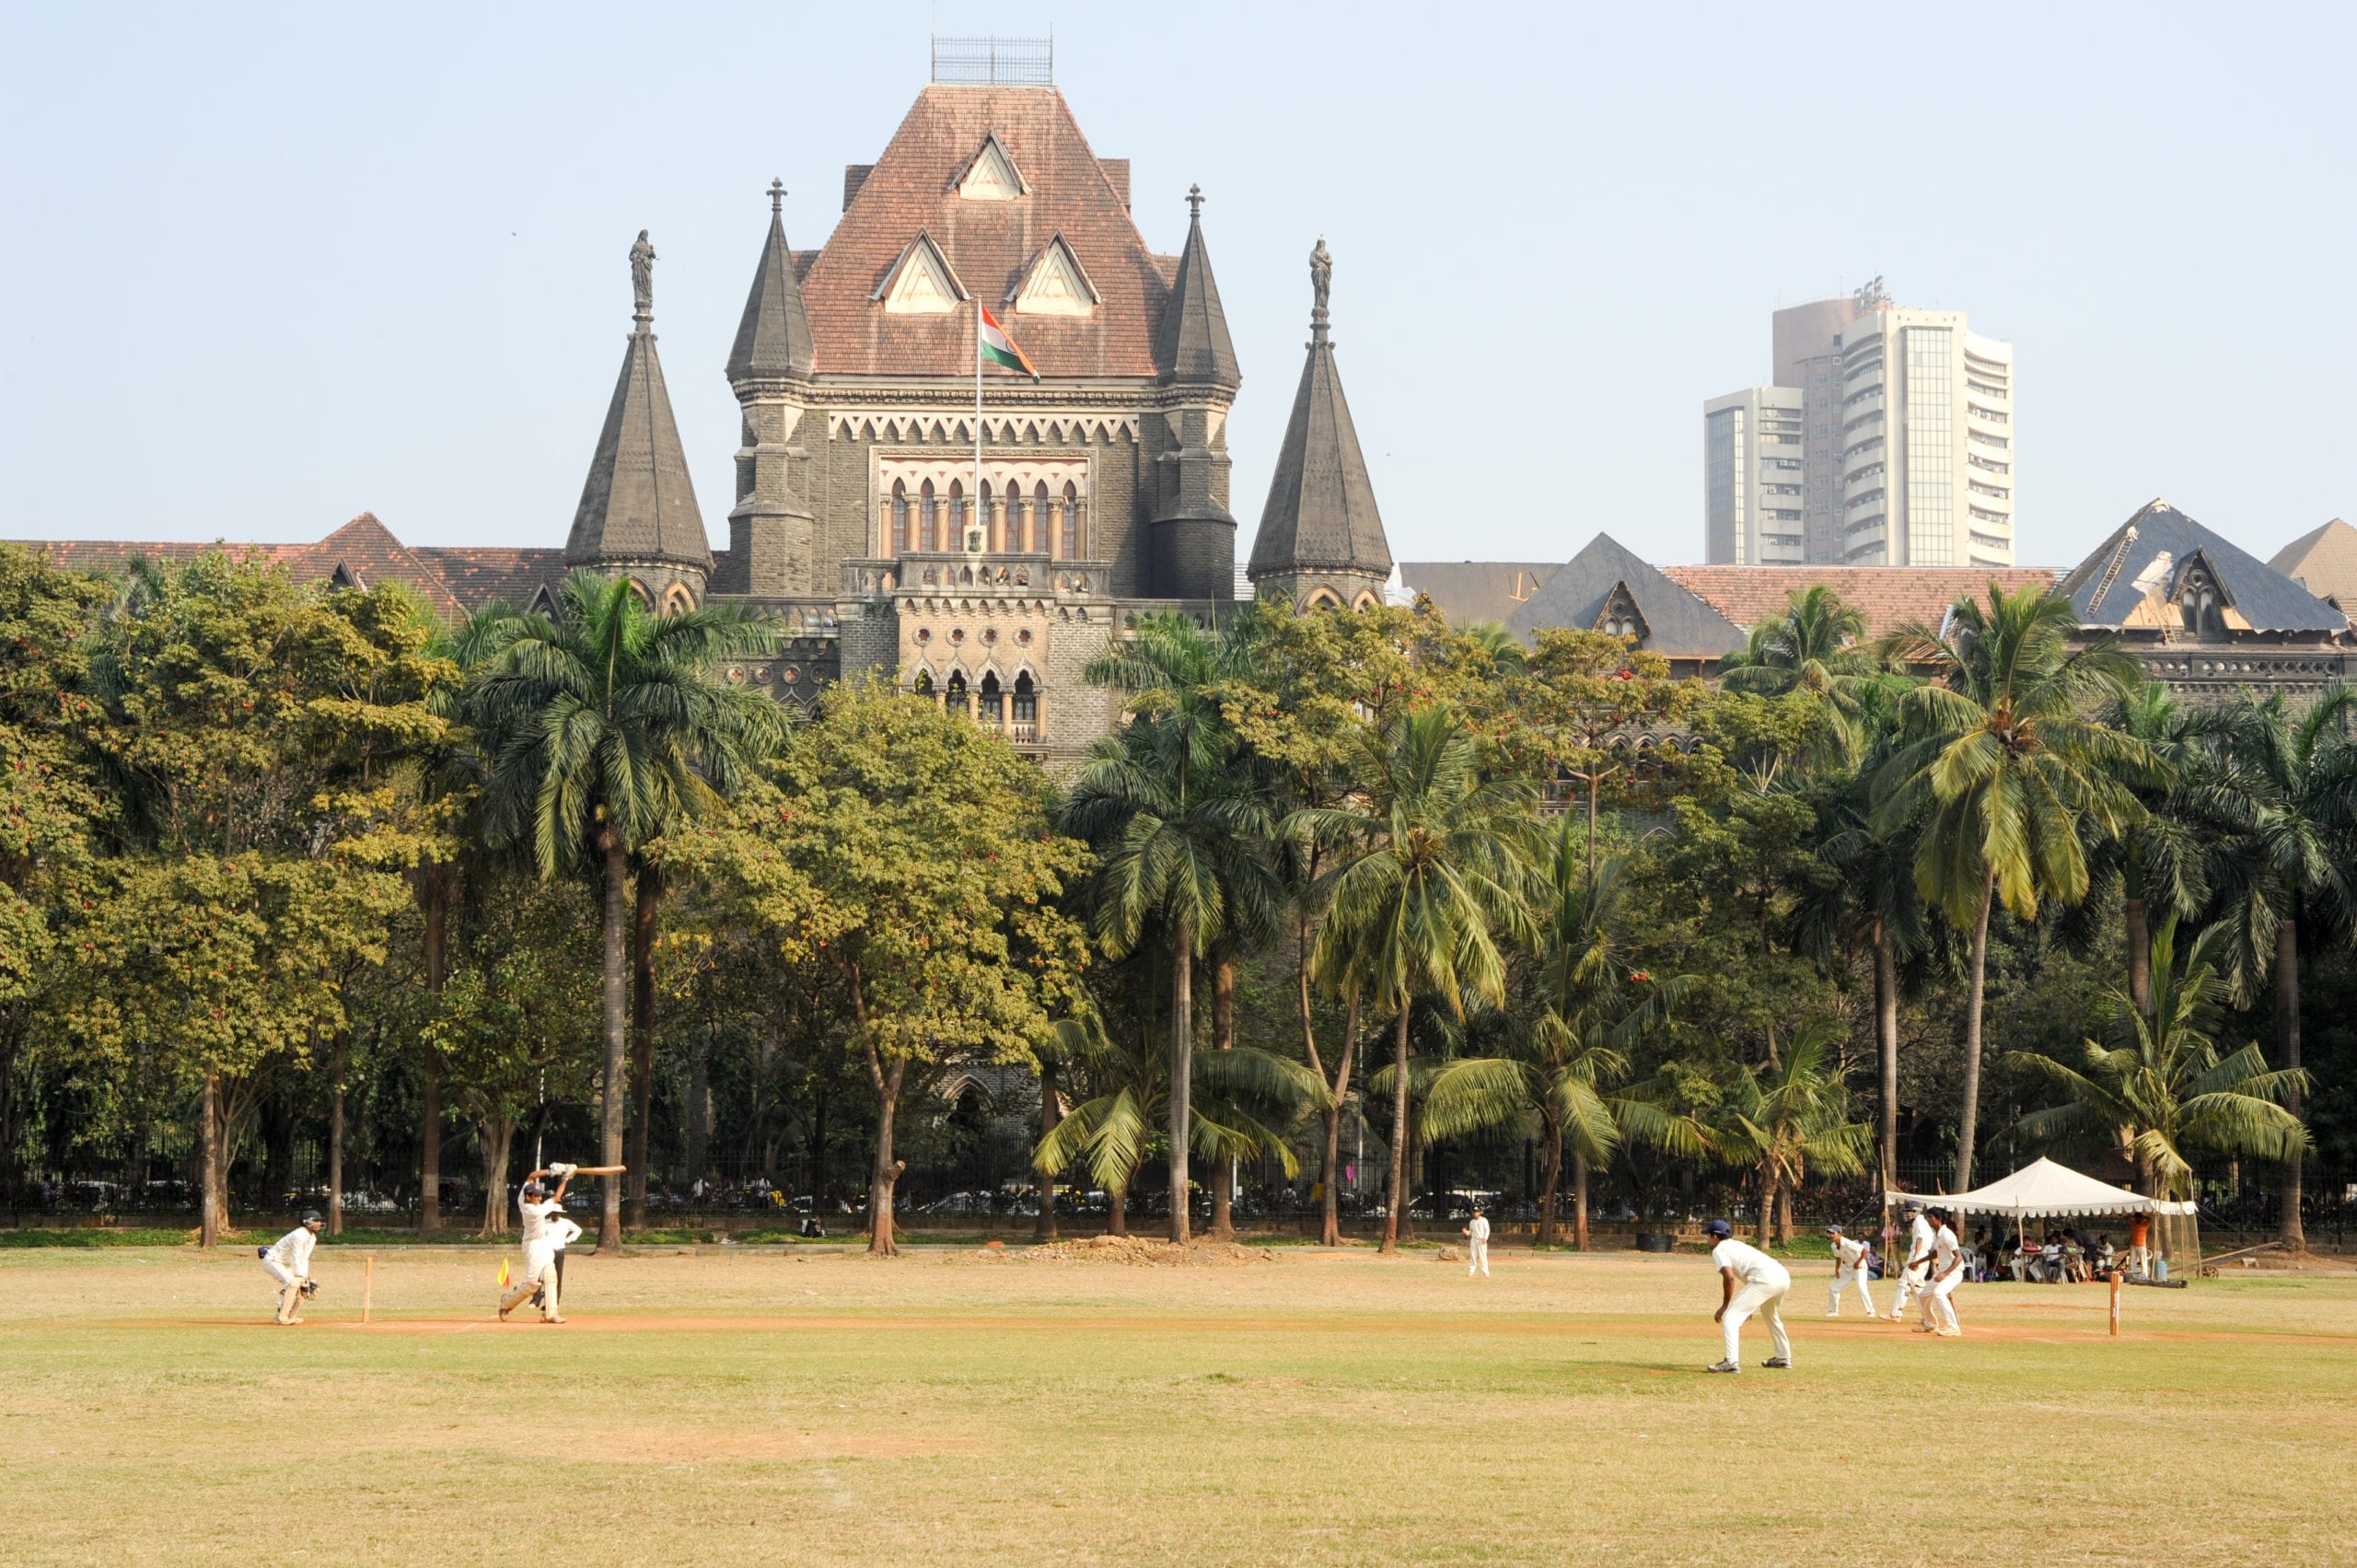 People playing cricket in the central park at Mumbai